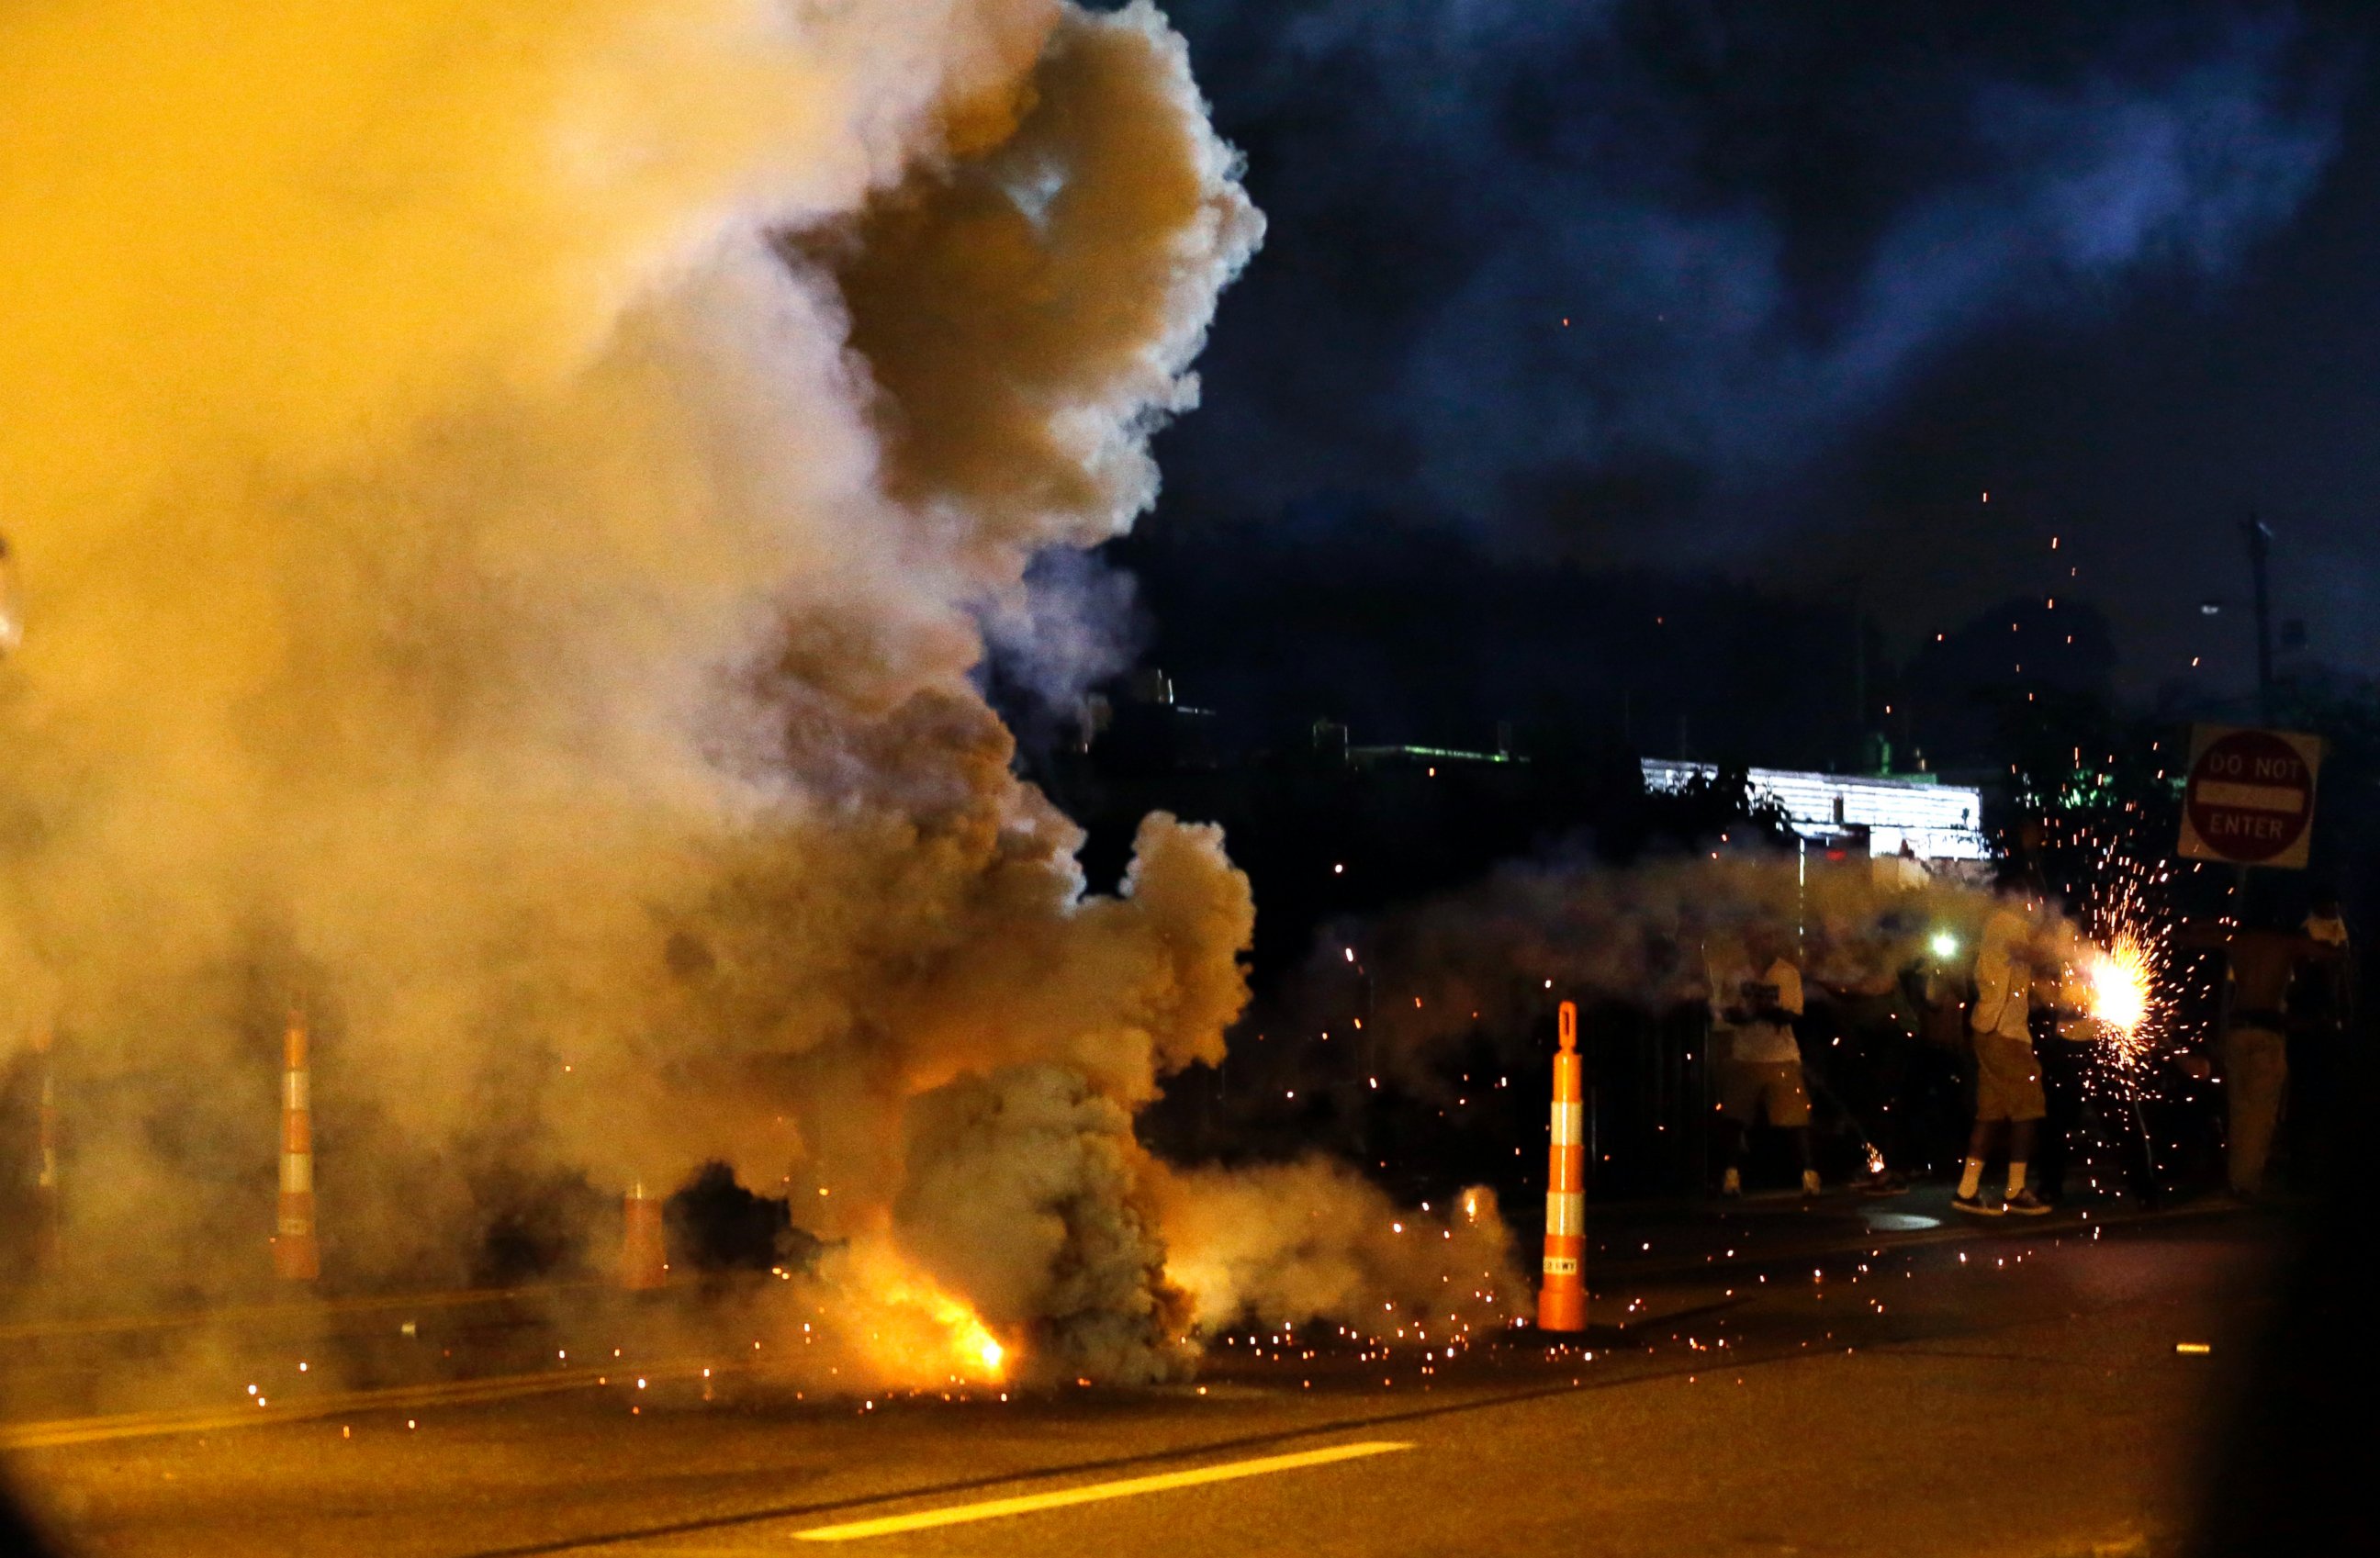 PHOTO: Tear gas is deployed after police were fired upon, Aug. 18, 2014, in Ferguson, Mo.